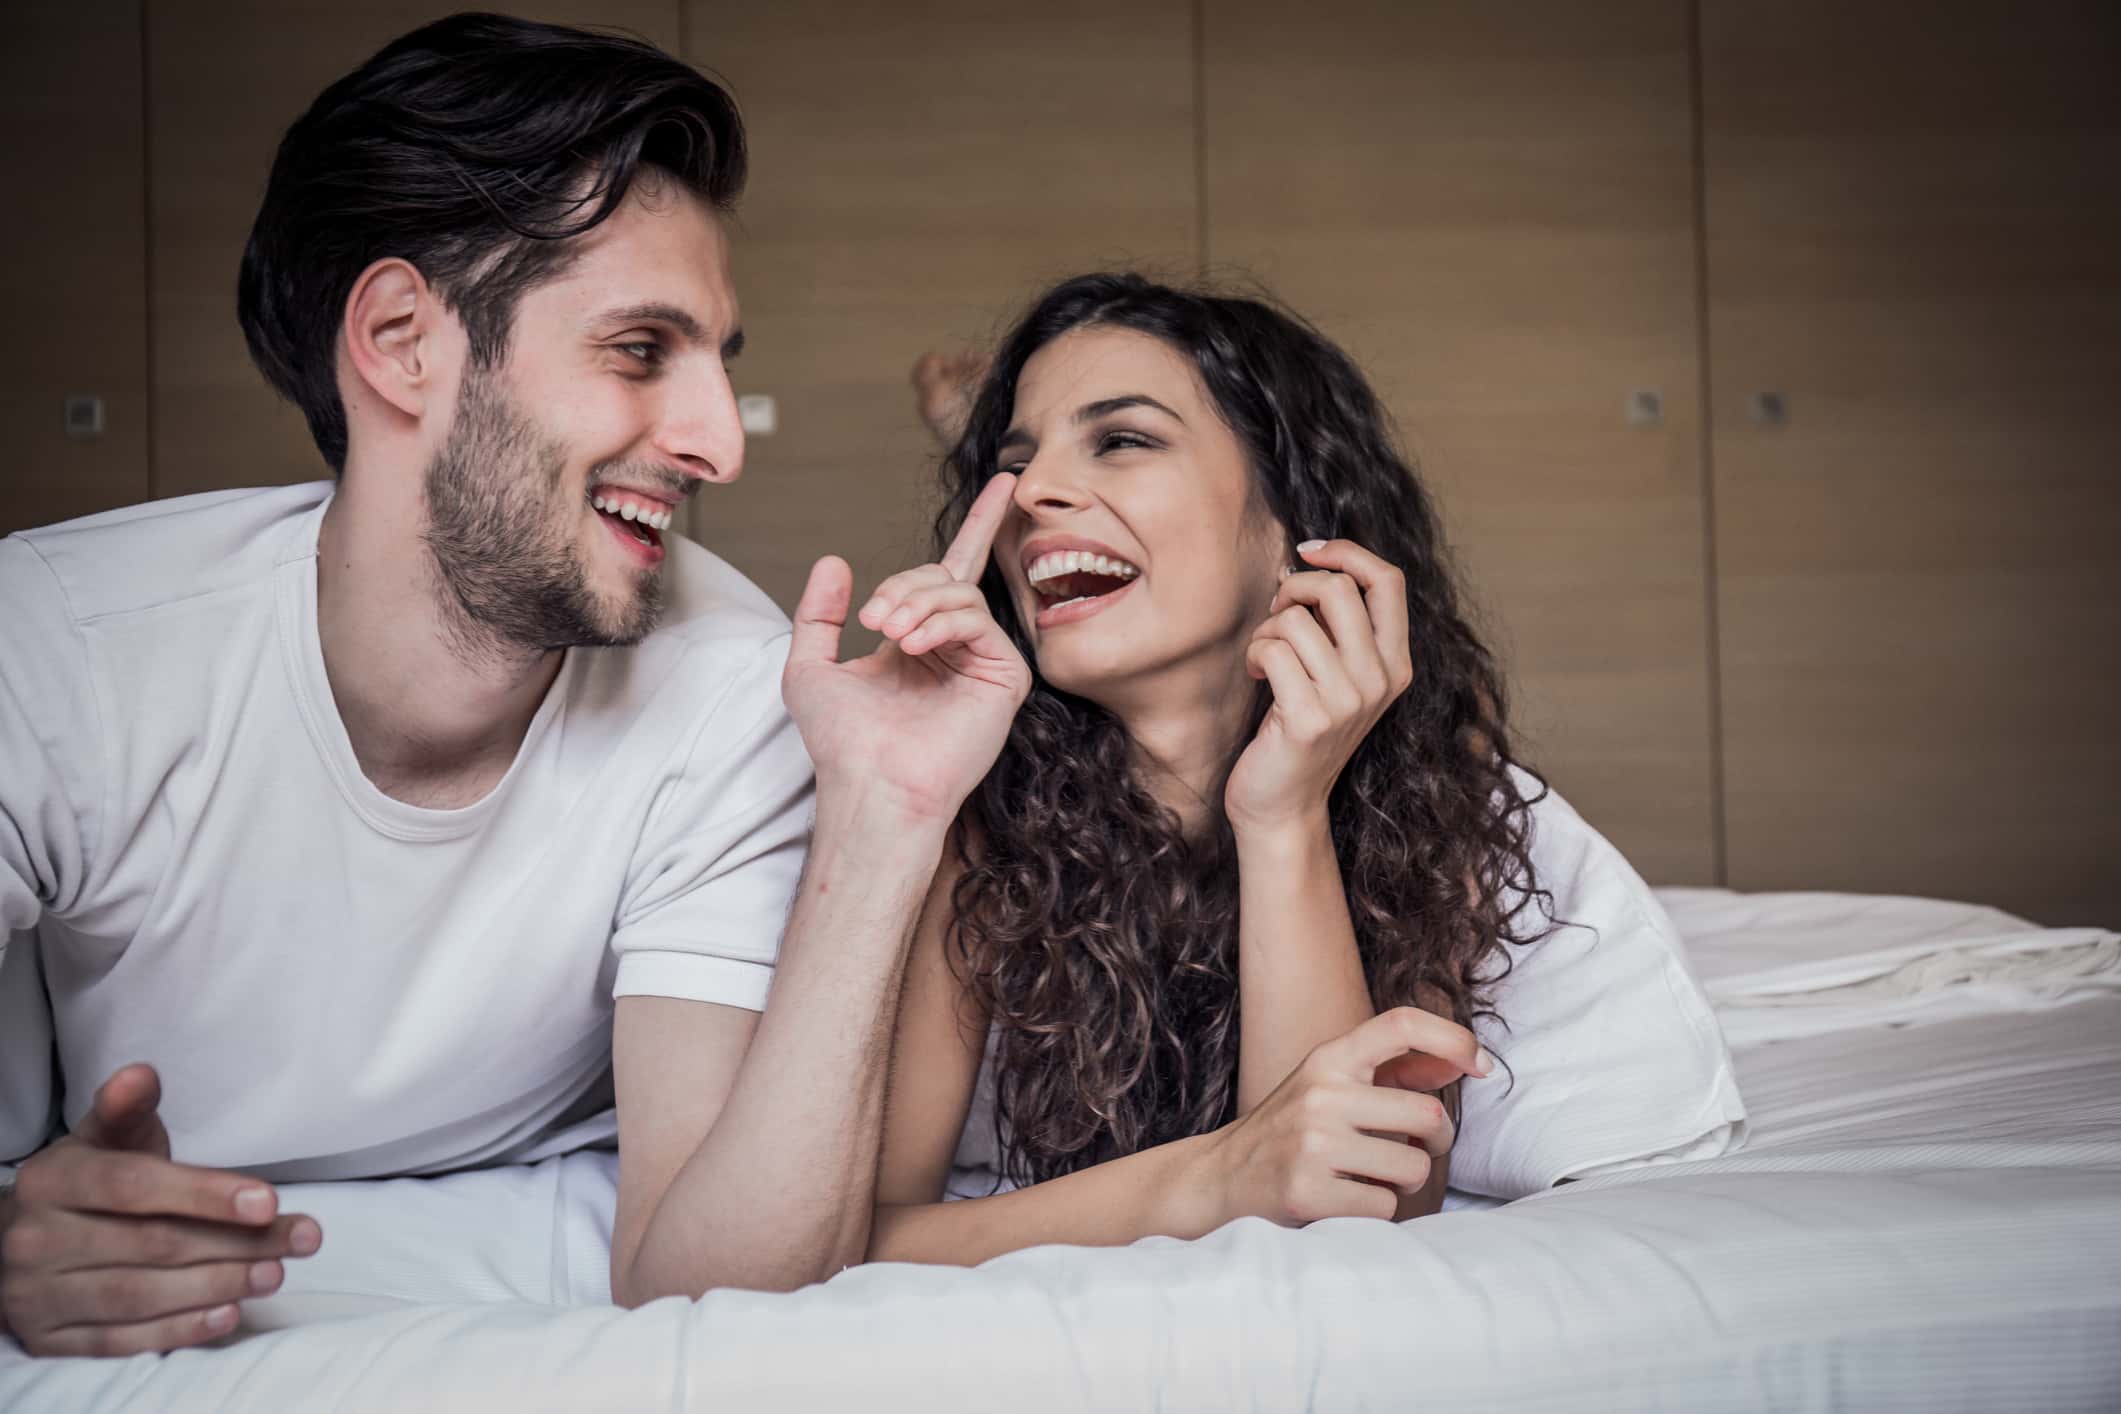 People Share The Cringiest Thing They Have Done In A First Relationship